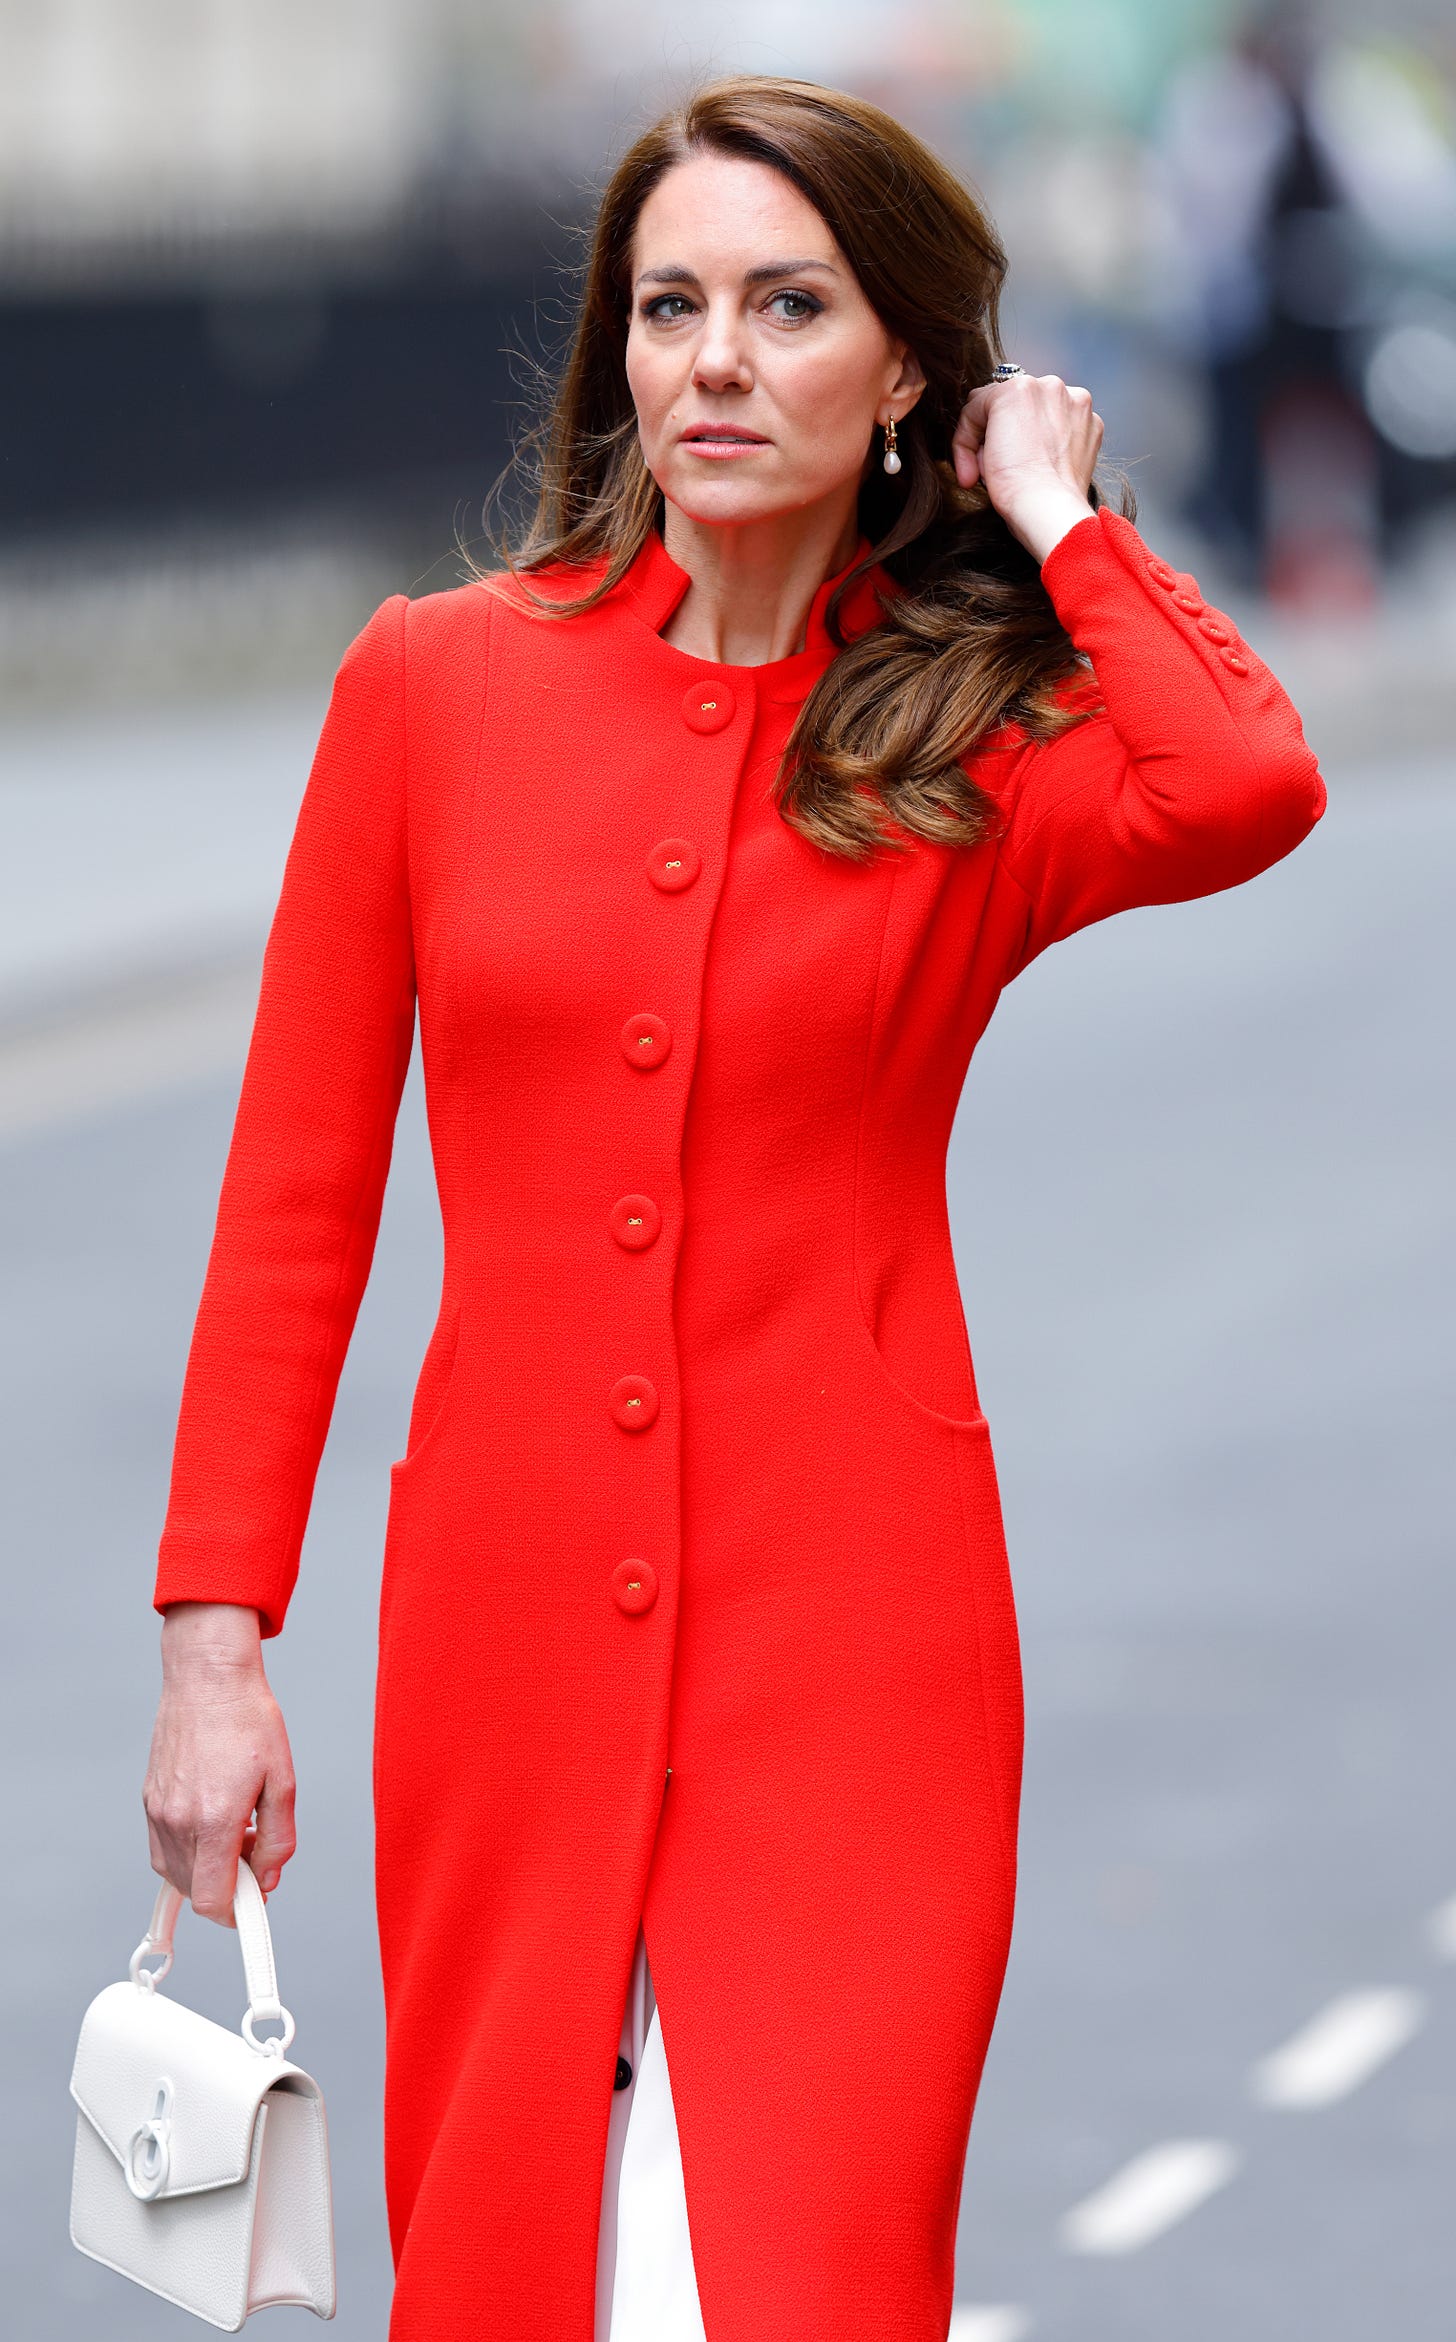 Kate Middleton in a red coat touching her hair